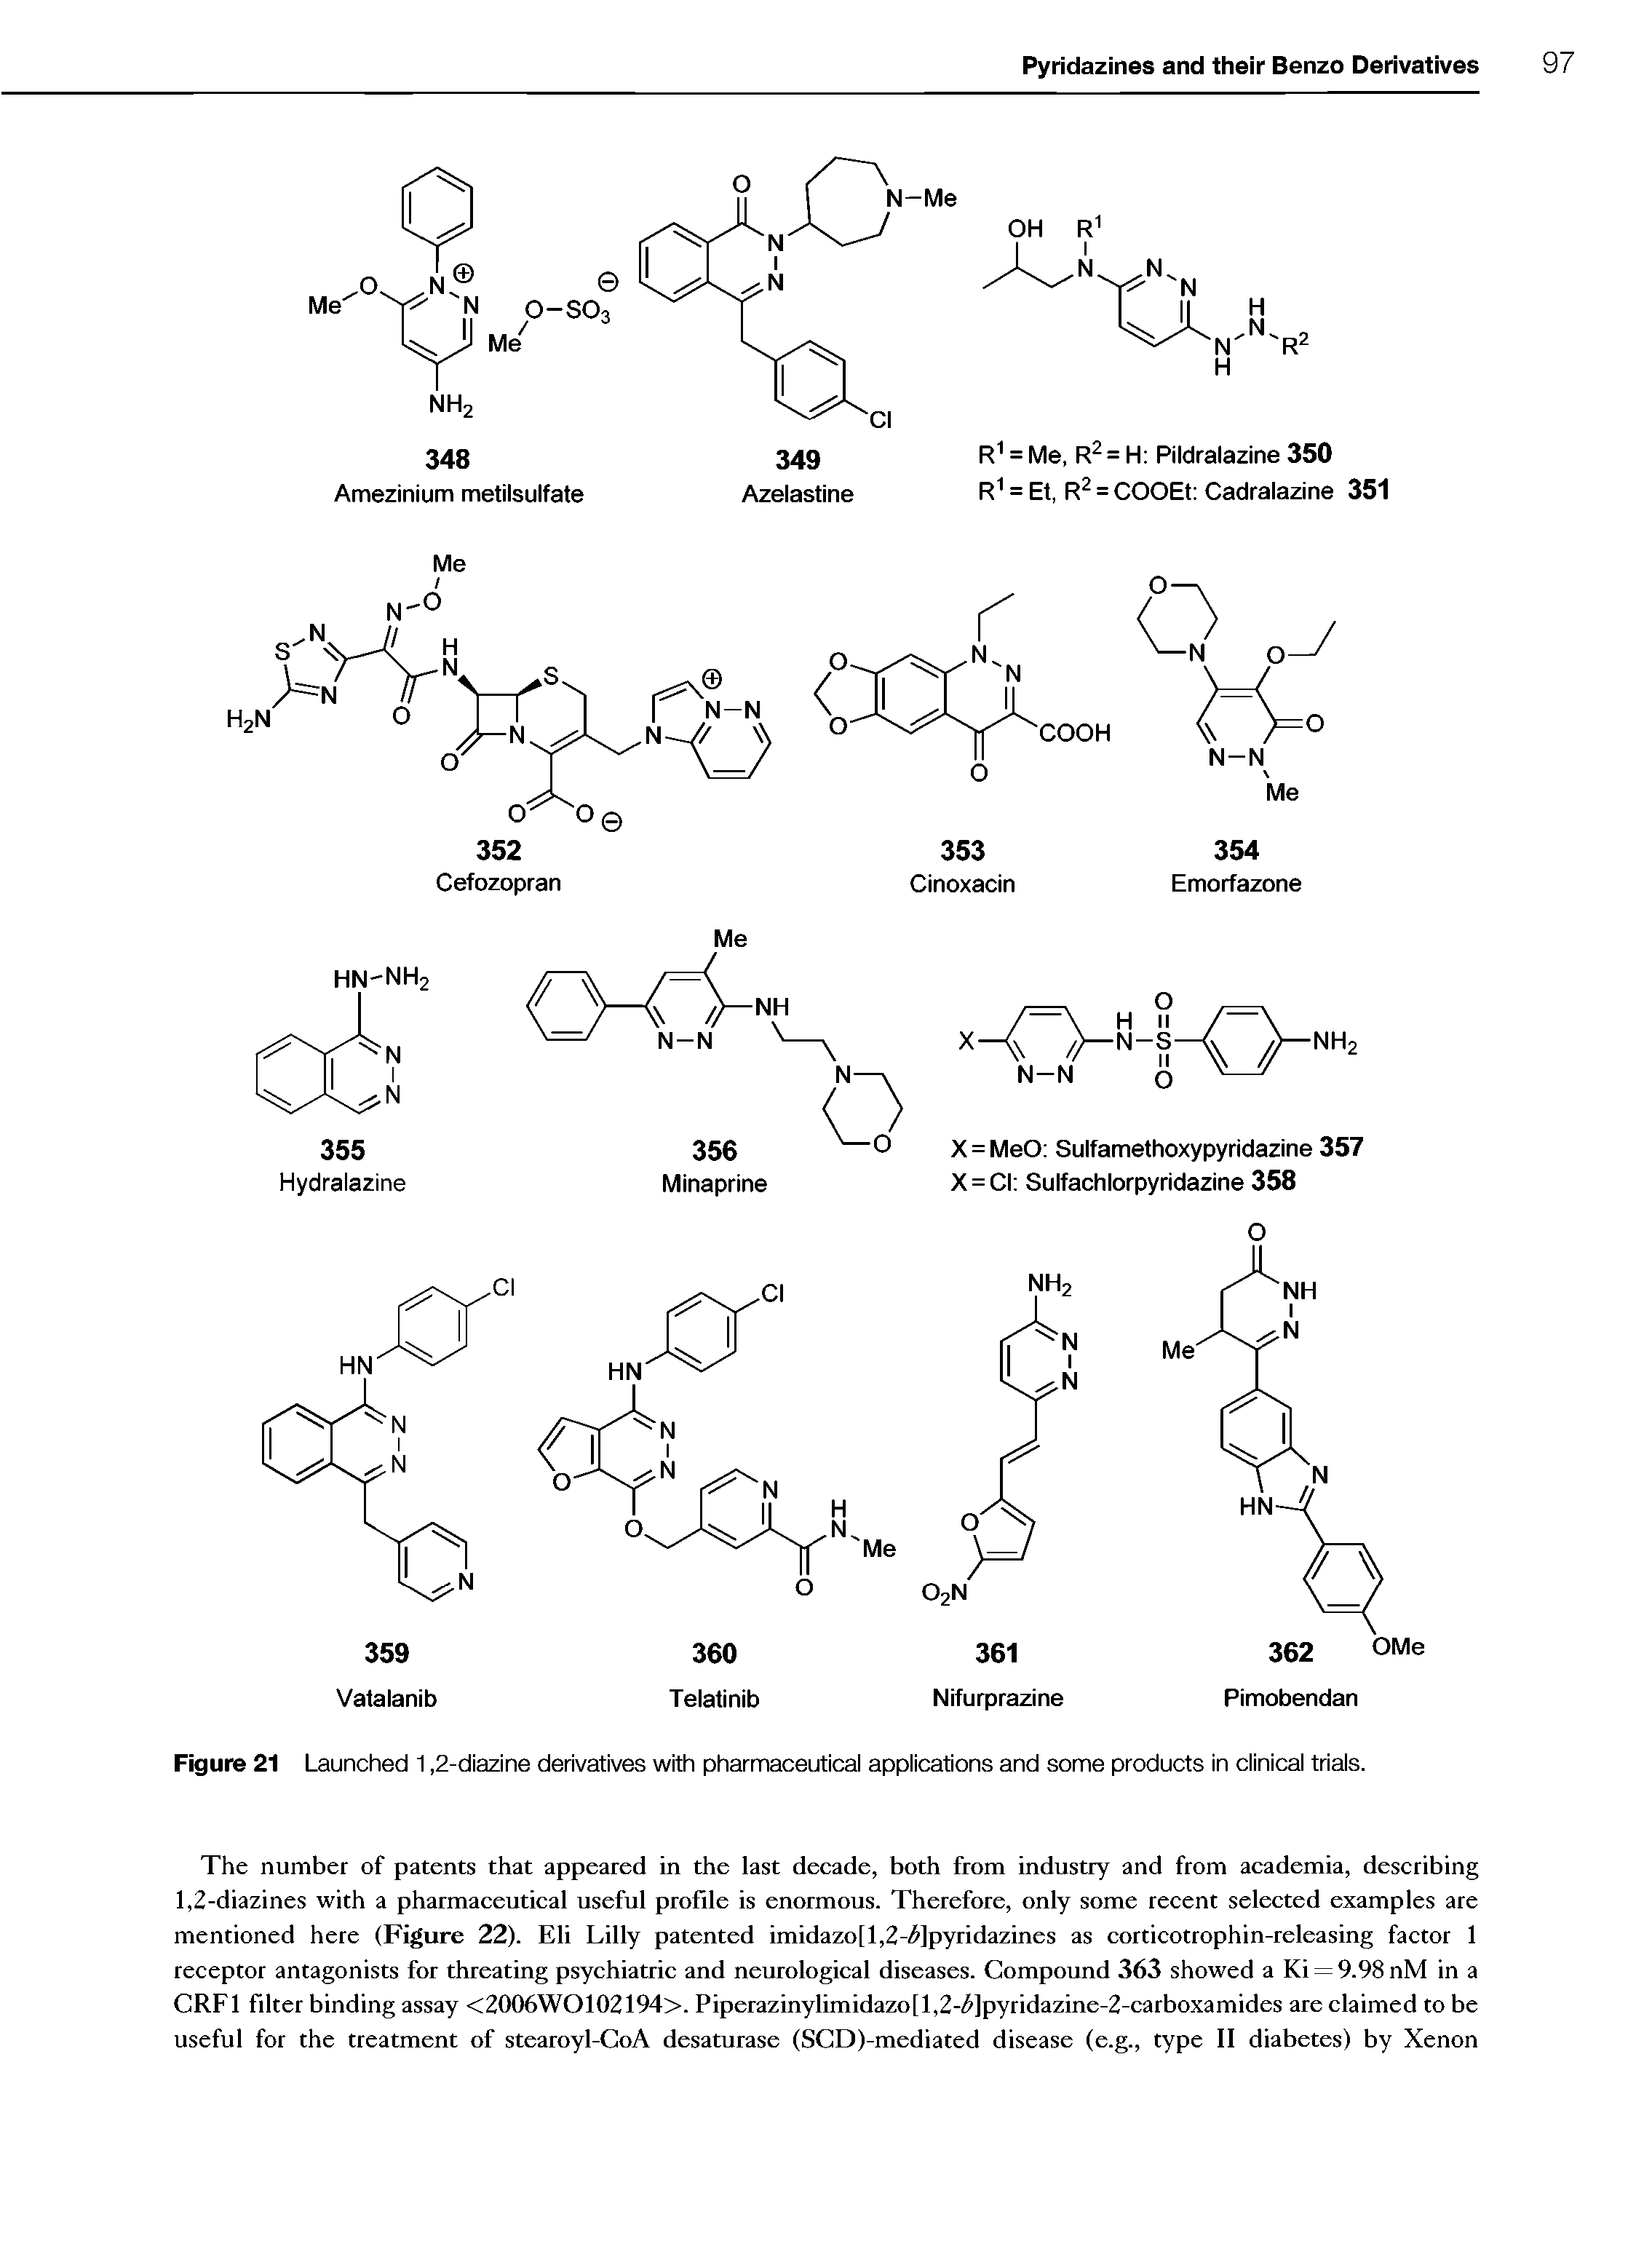 Figure 21 Launched 1,2-diazine derivatives with pharmaceutical applications and some products in clinical trials.